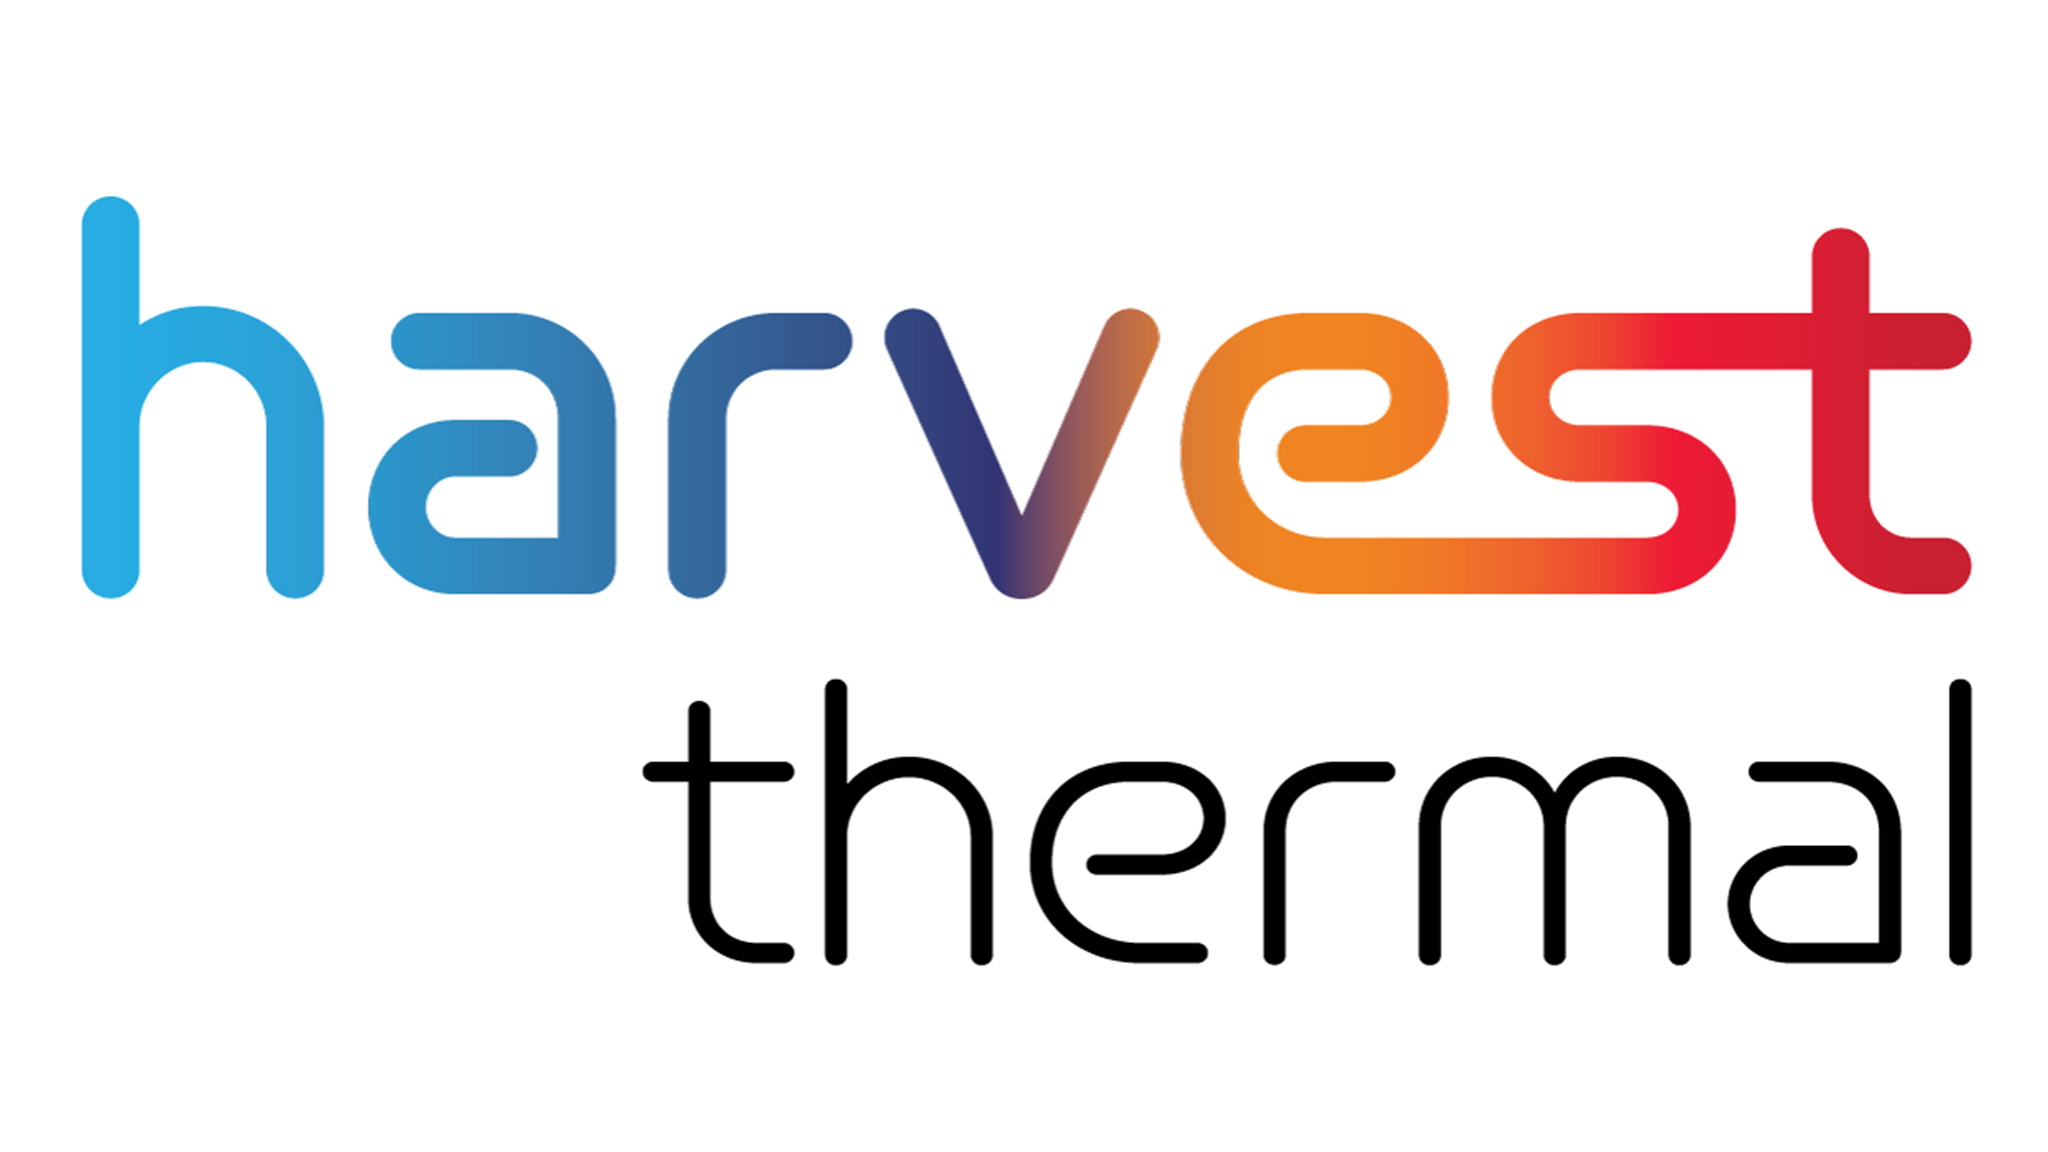 Harvest Thermal Raises $4M Seed Round To Optimize Heat Pump Efficiency